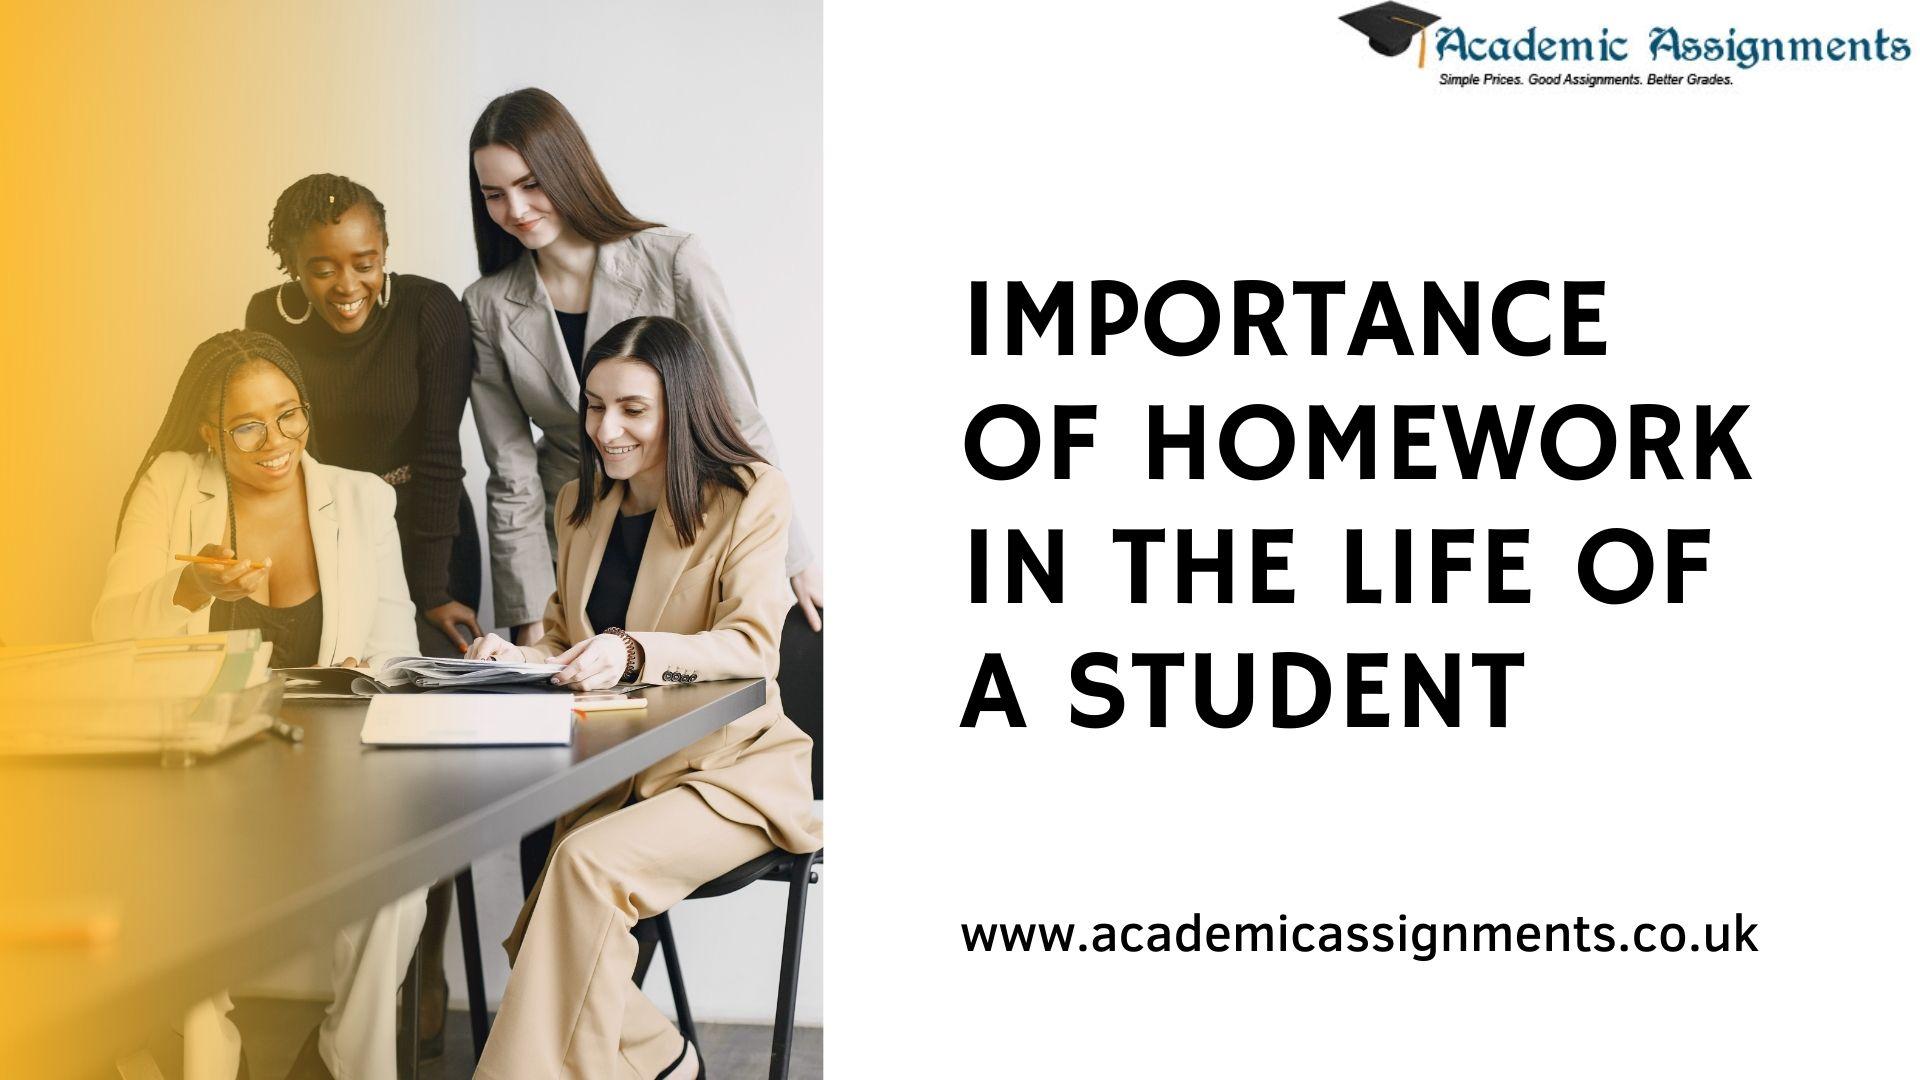 articles about the importance of homework